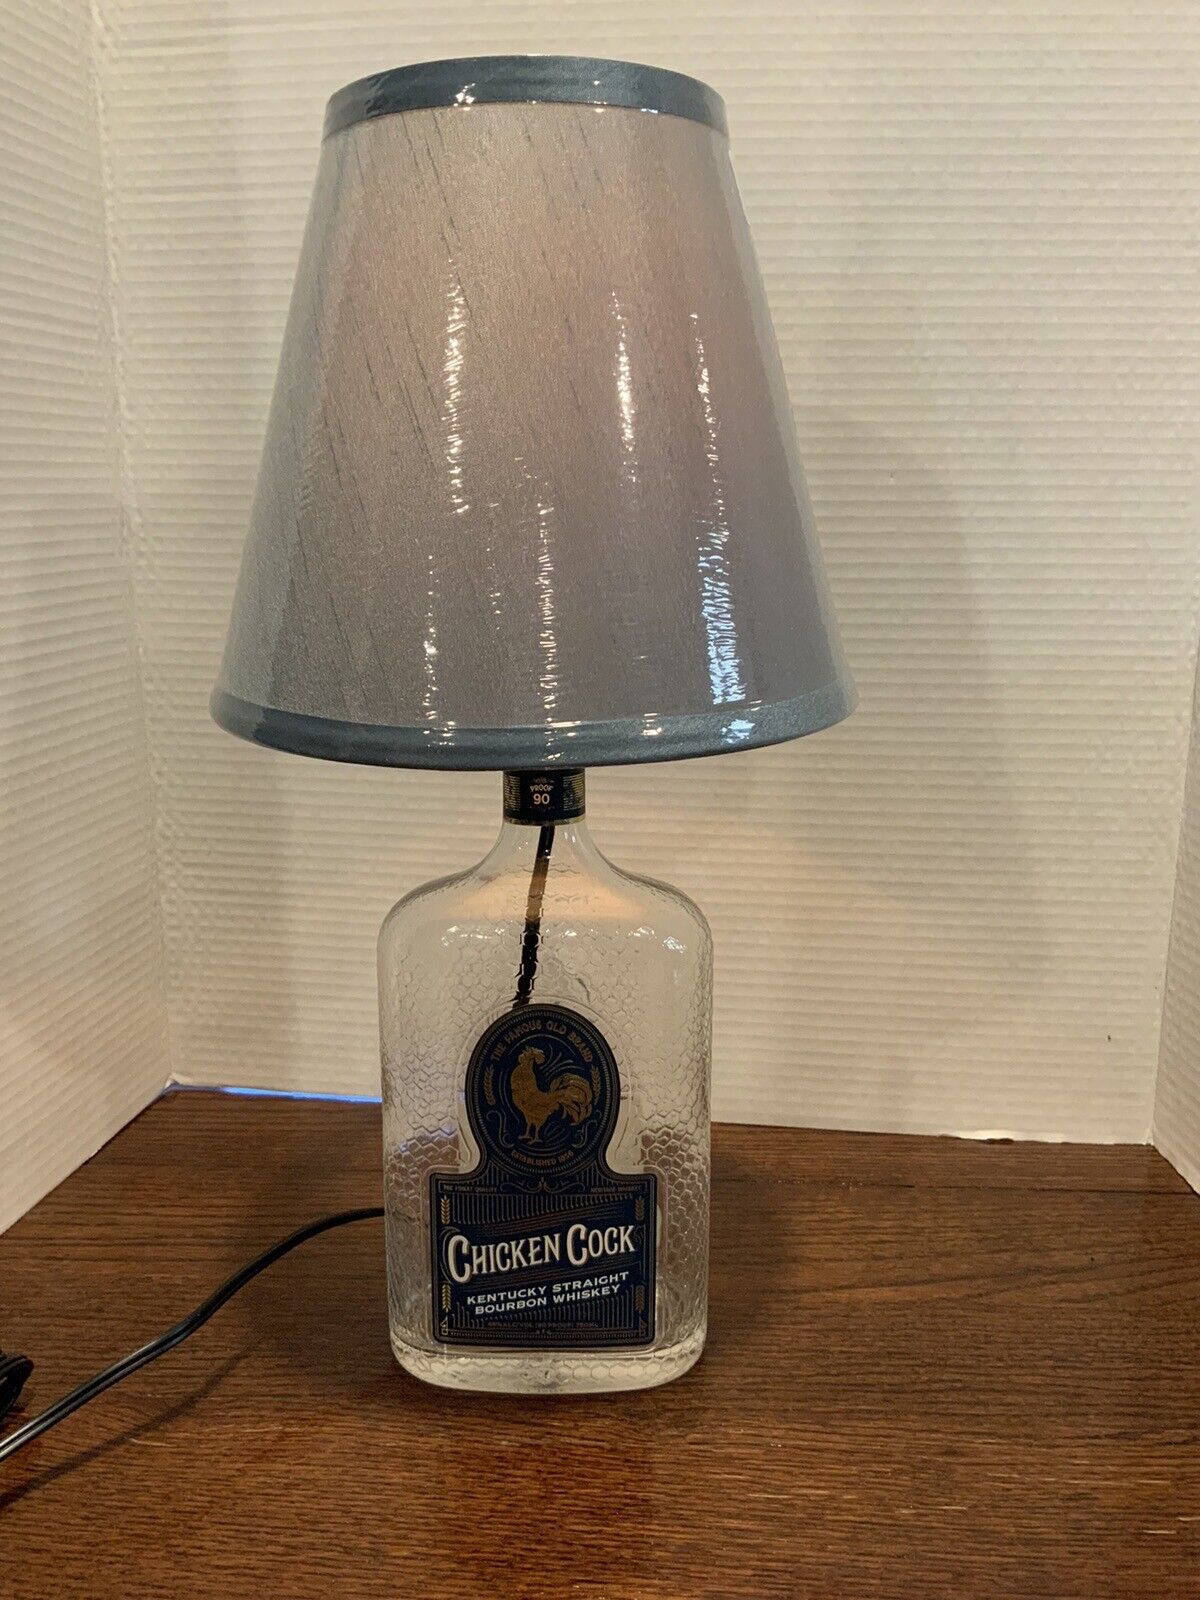 Chicken Cock Bourbon Whiskey Liquor Bar Bottle Lamp With Shade And Bulb